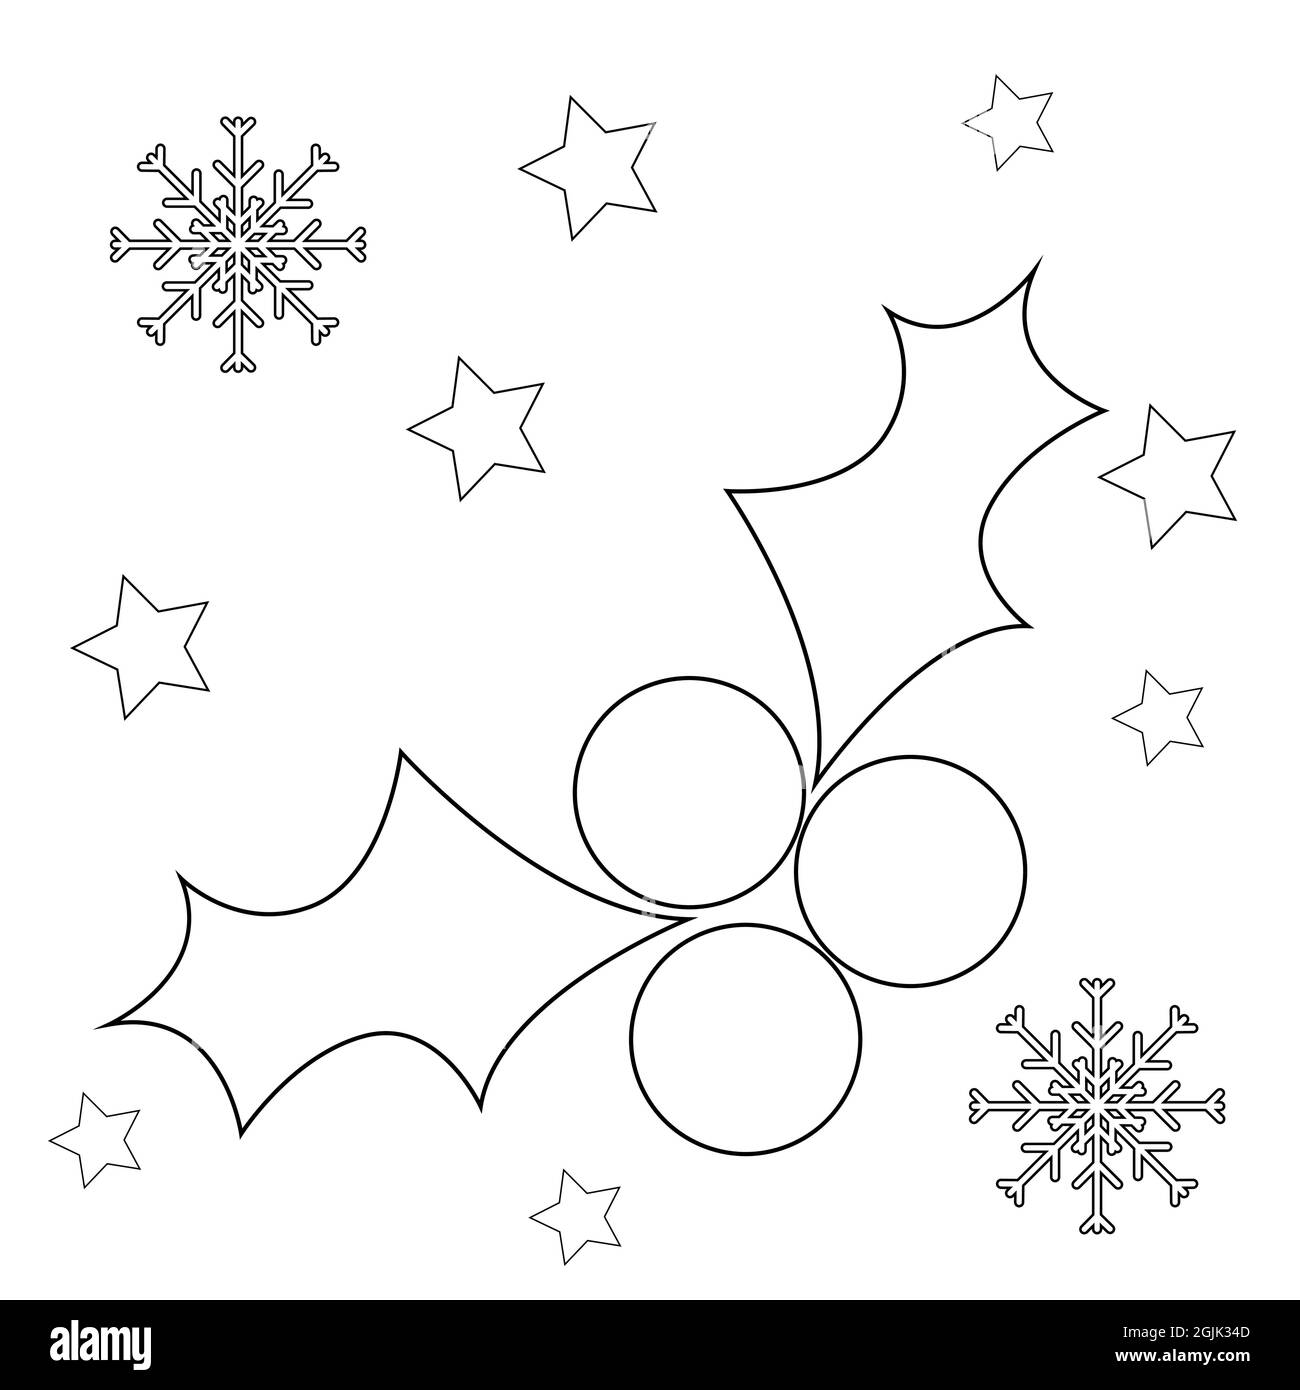 FREE! - Christmas Holly Colouring Page